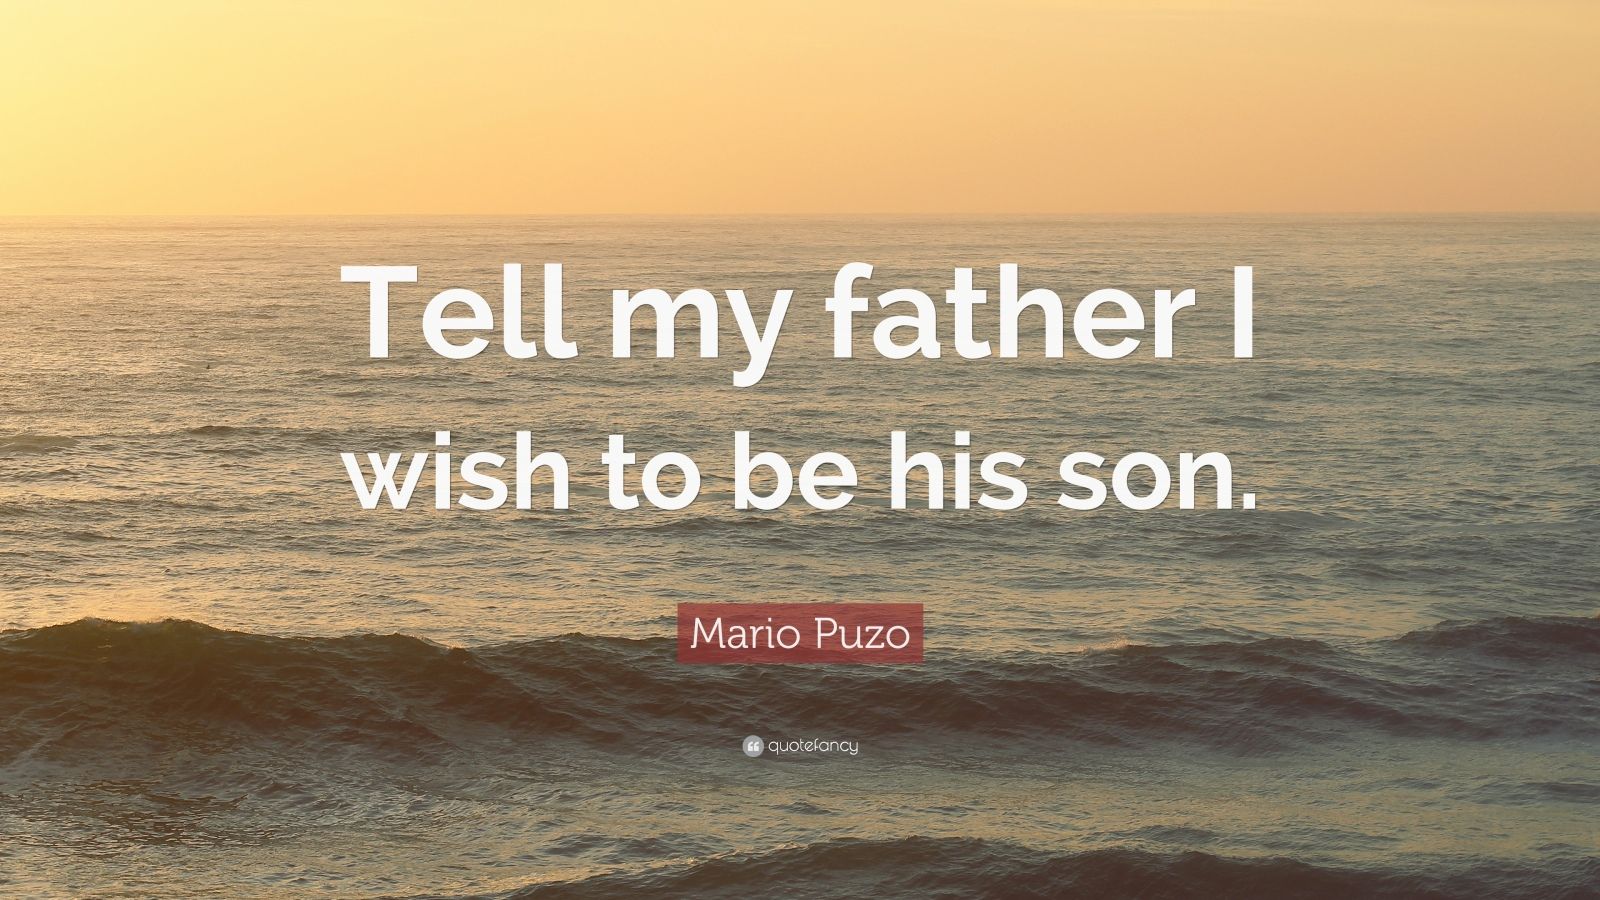 Mario Puzo Quote: "Tell my father I wish to be his son." (12 wallpapers) - Quotefancy